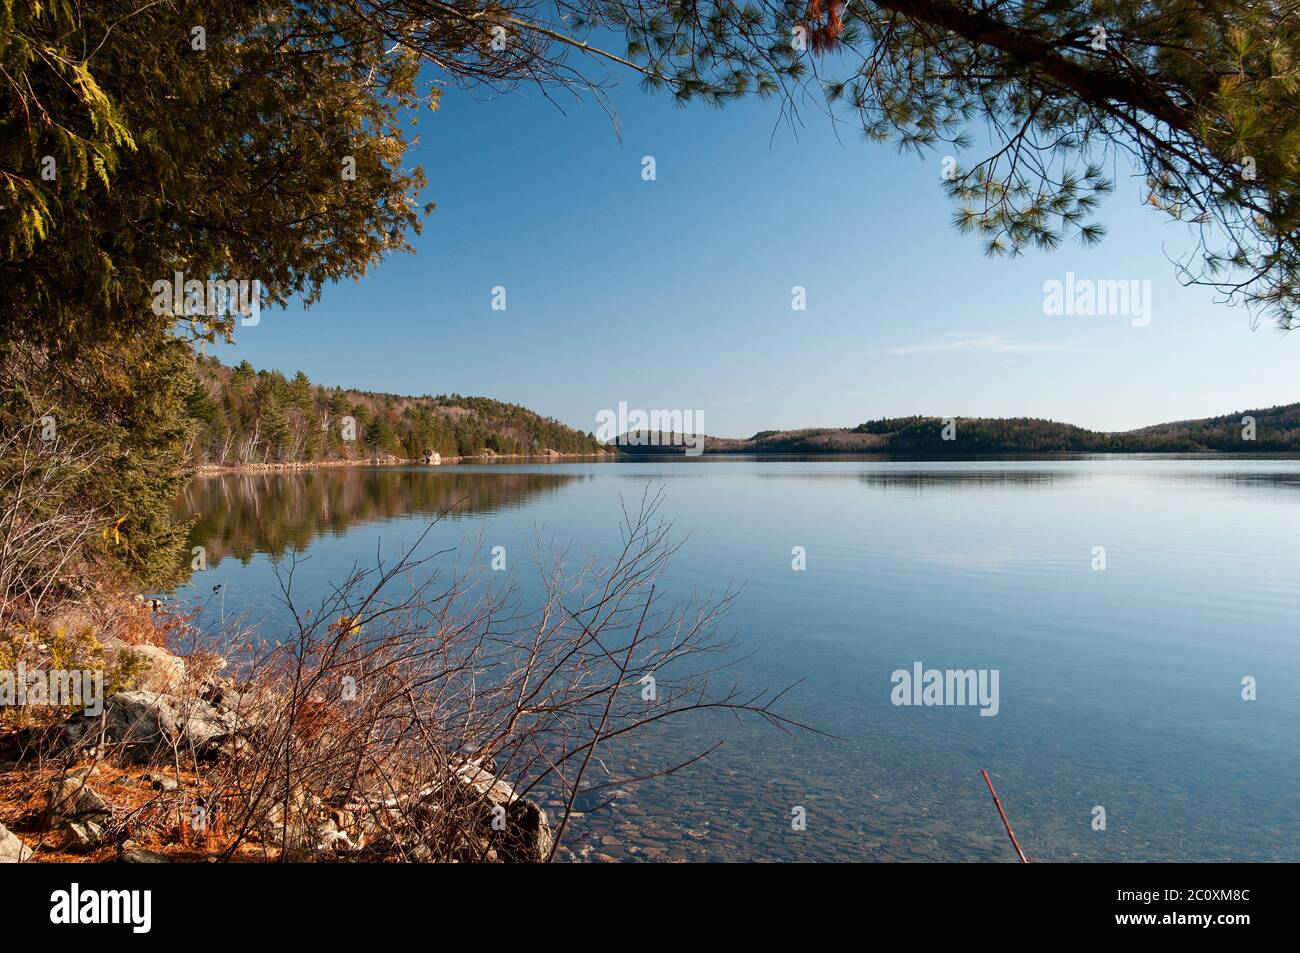 Summer Season lake with a frame picture displaying its summer season, trees and horizon. Stock Photo